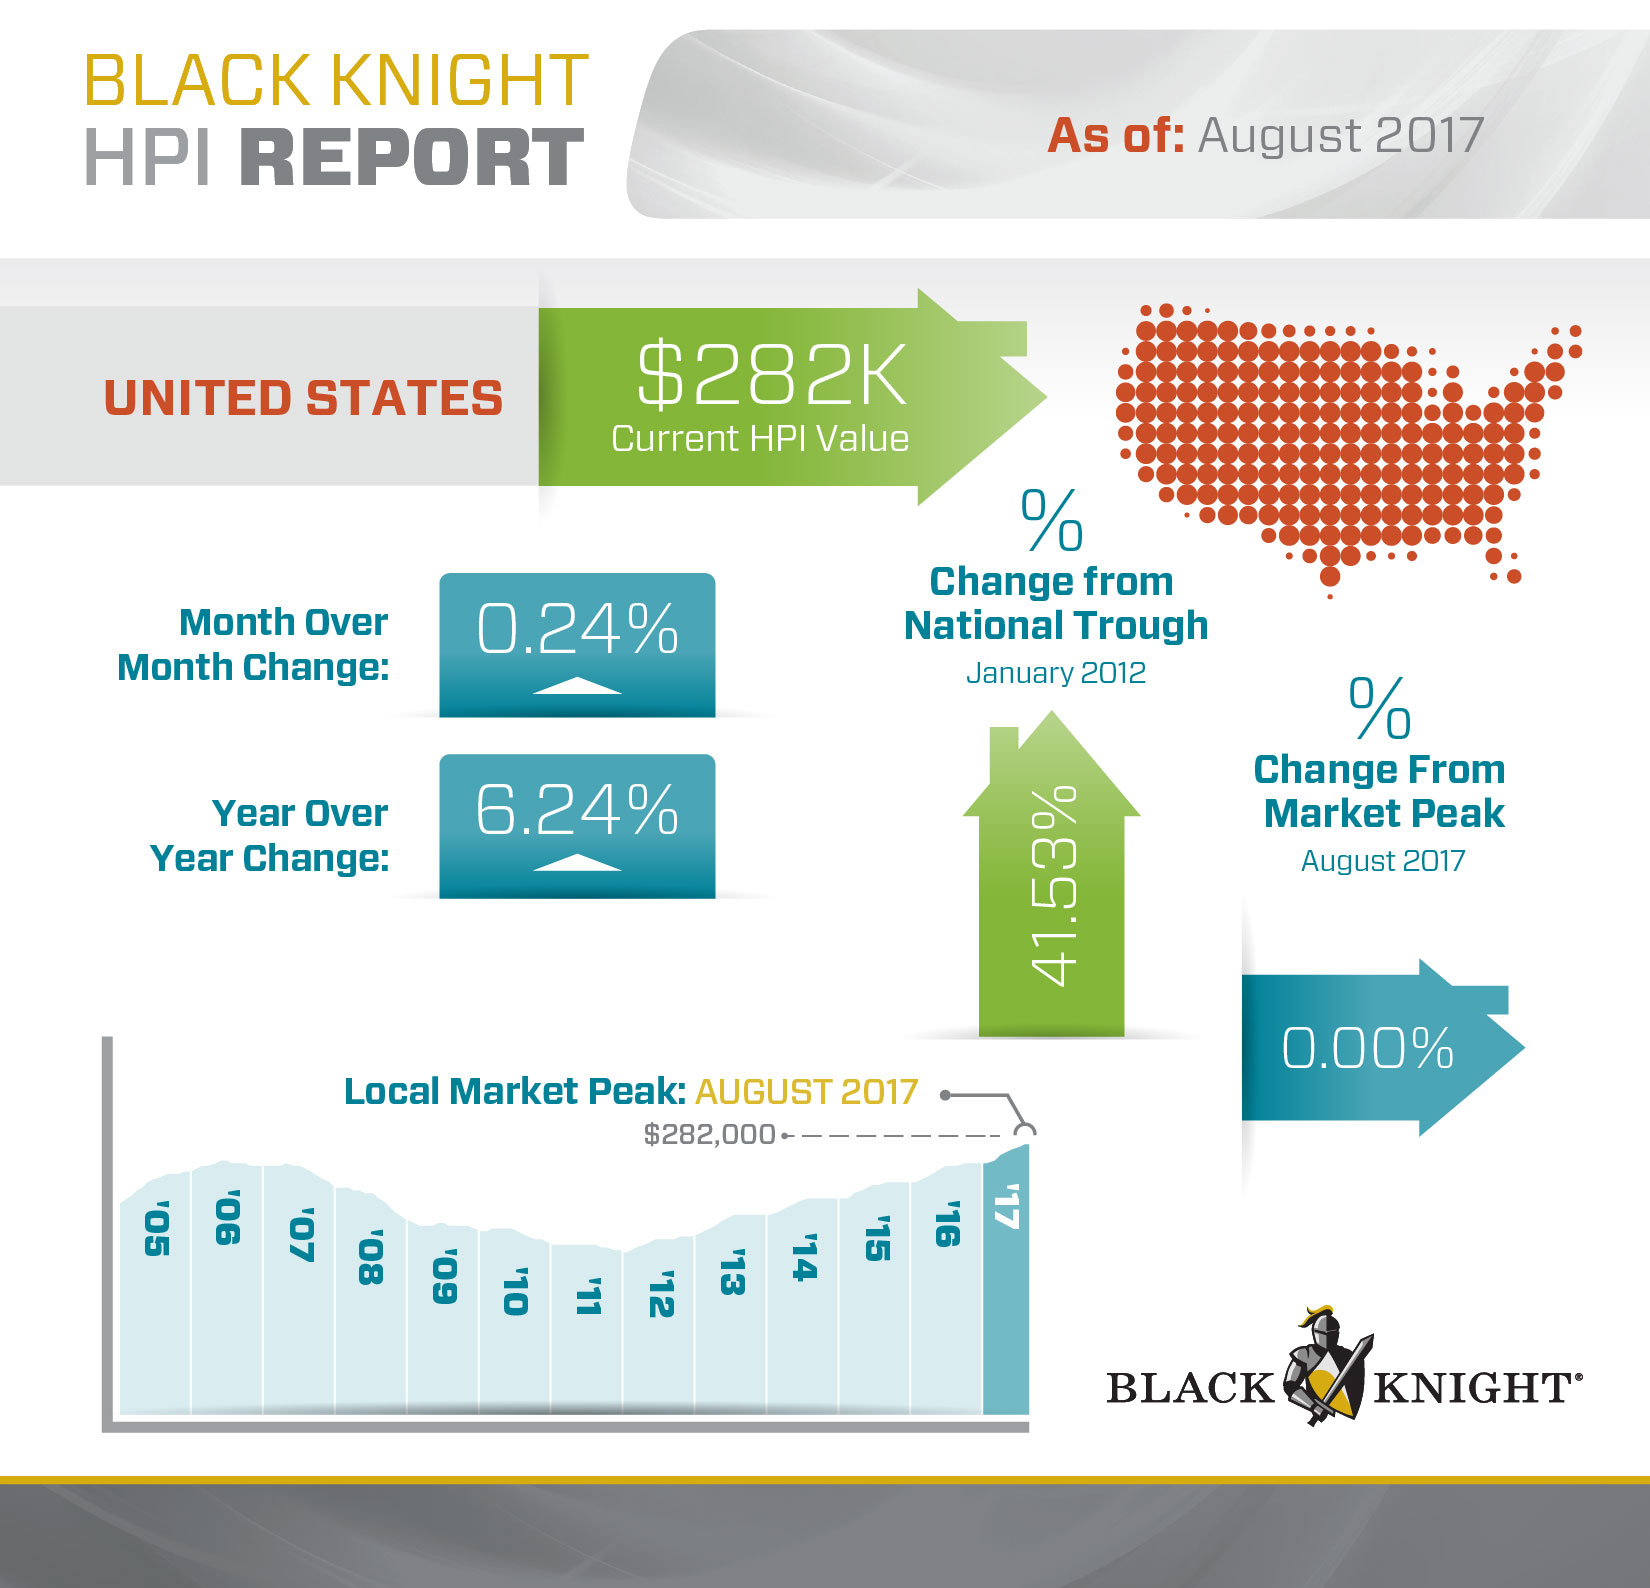 The seemingly nonstop ascension of U.S. home prices continued, albeit at a slower pace, according to the latest Black Knight Home Price Index (HPI) report